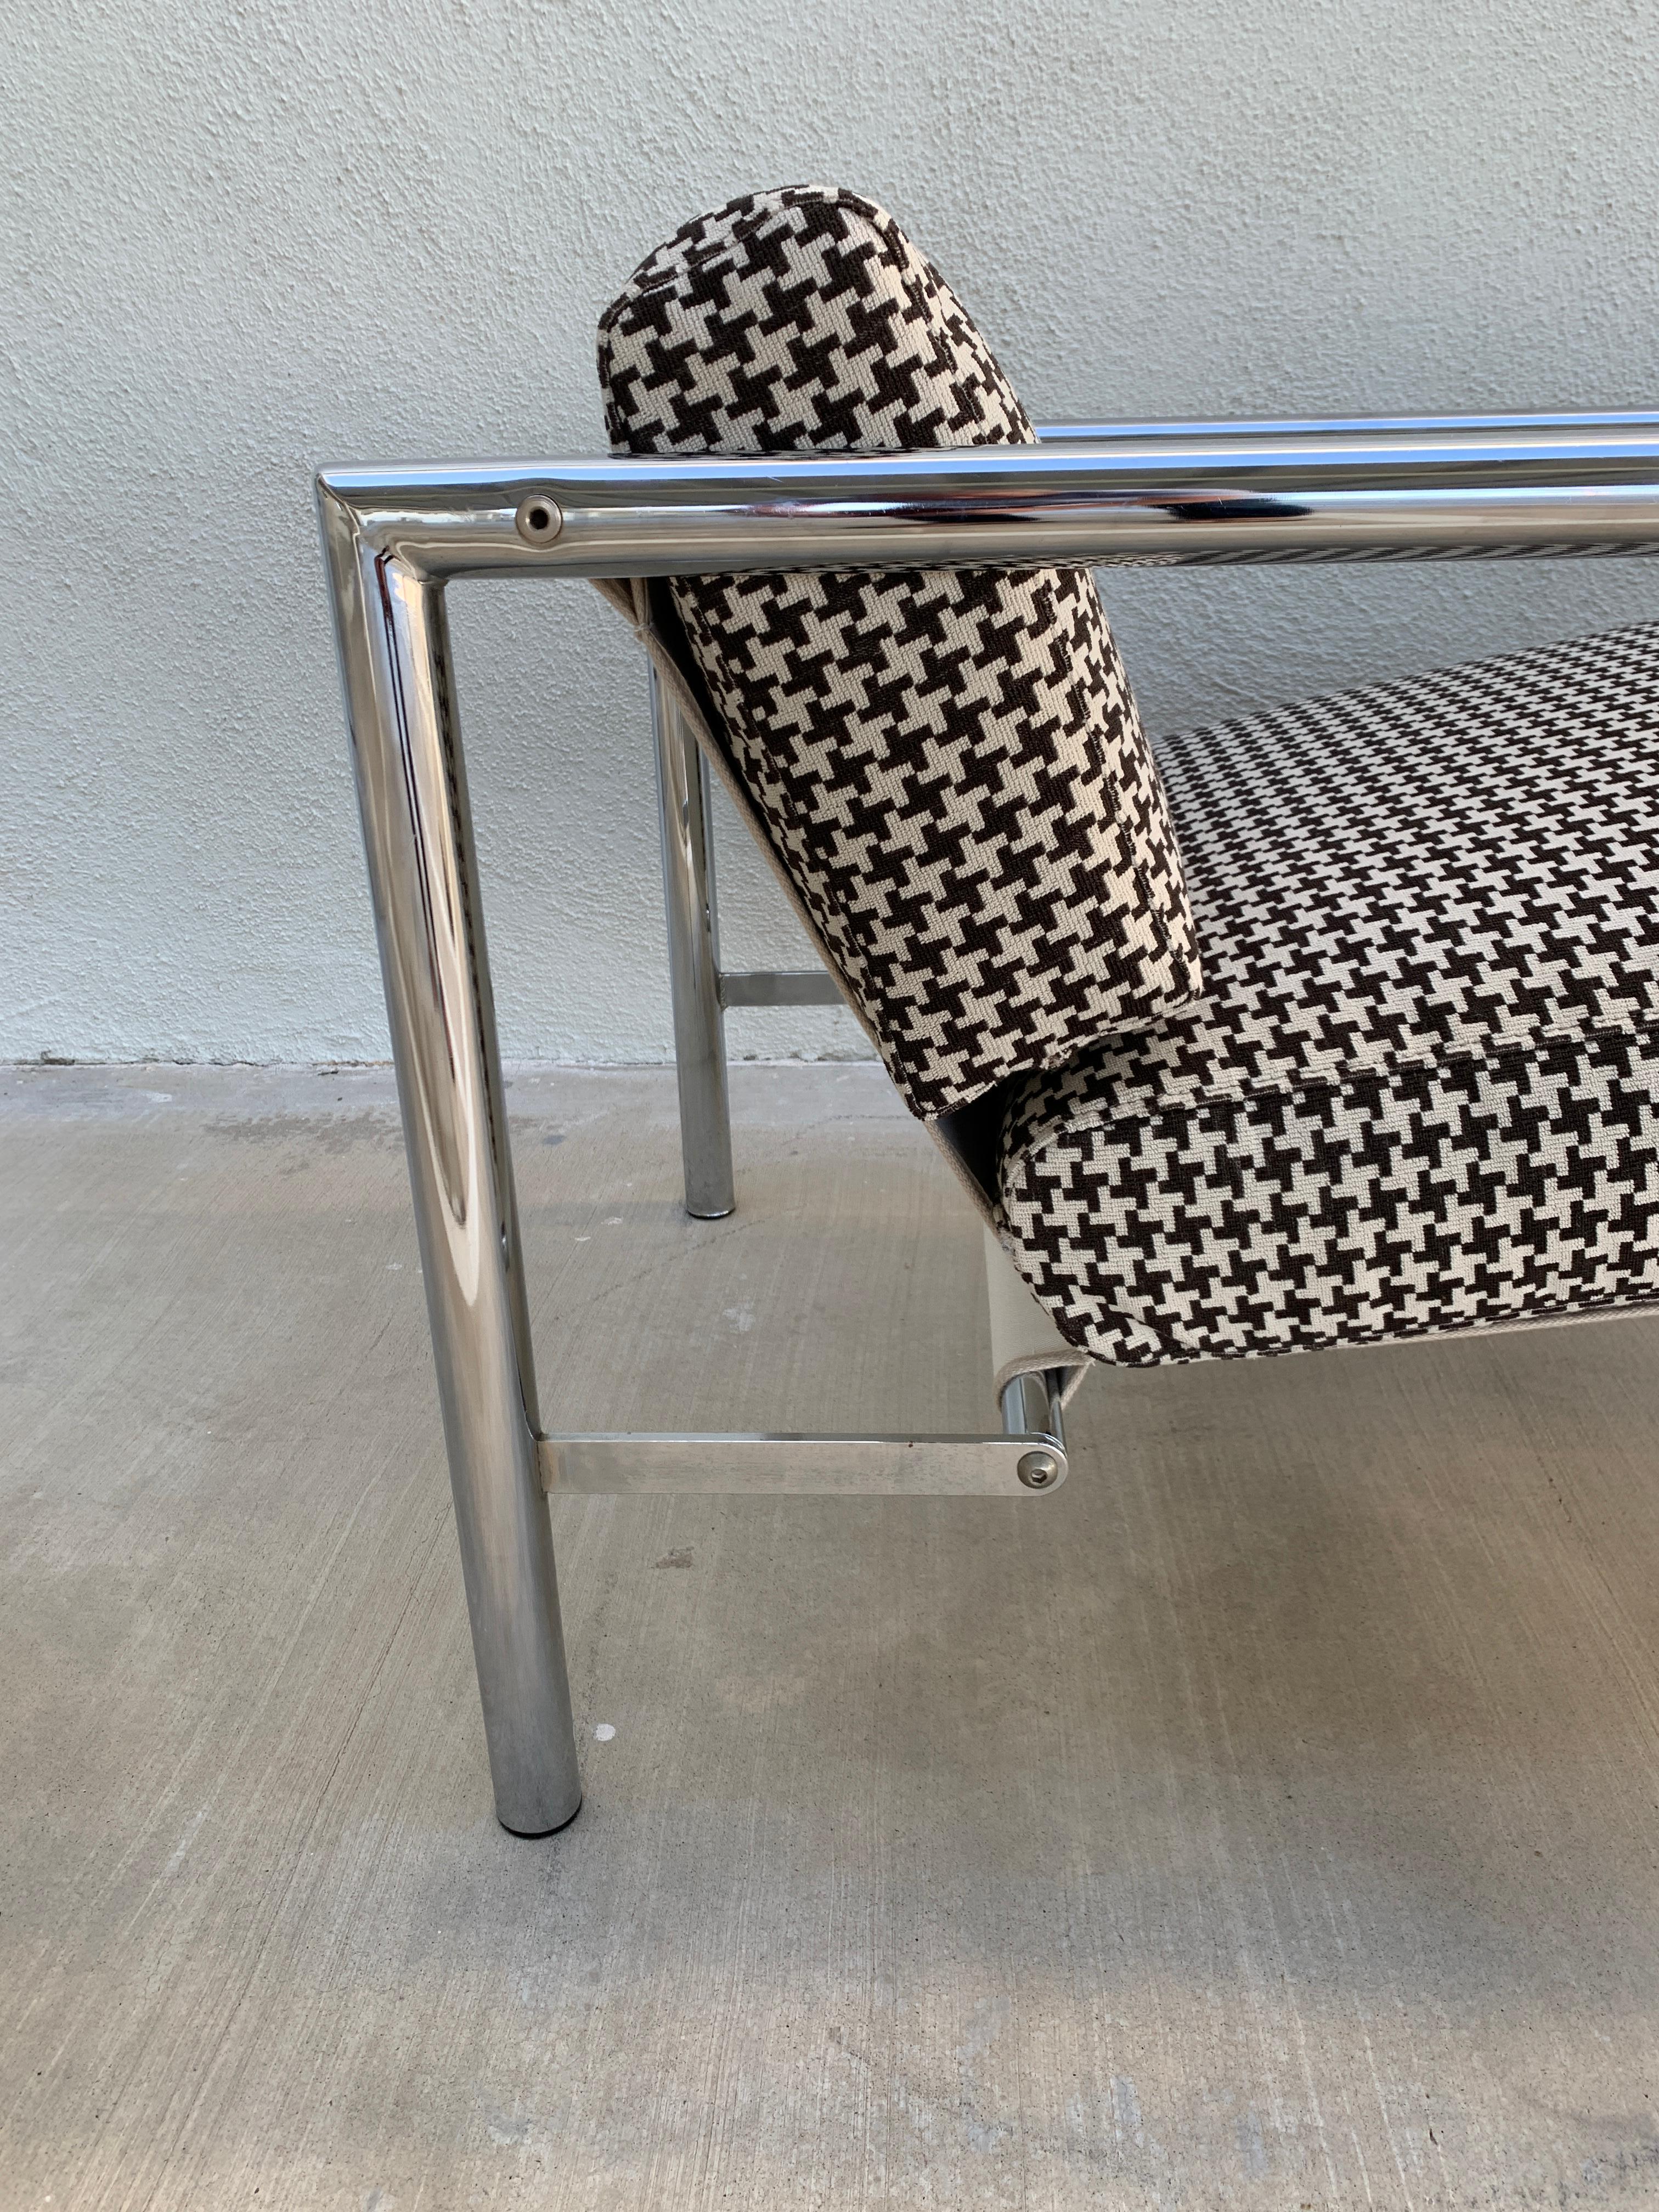 American Pair of Vintage 1970s Chrome Chairs in Houndstooth